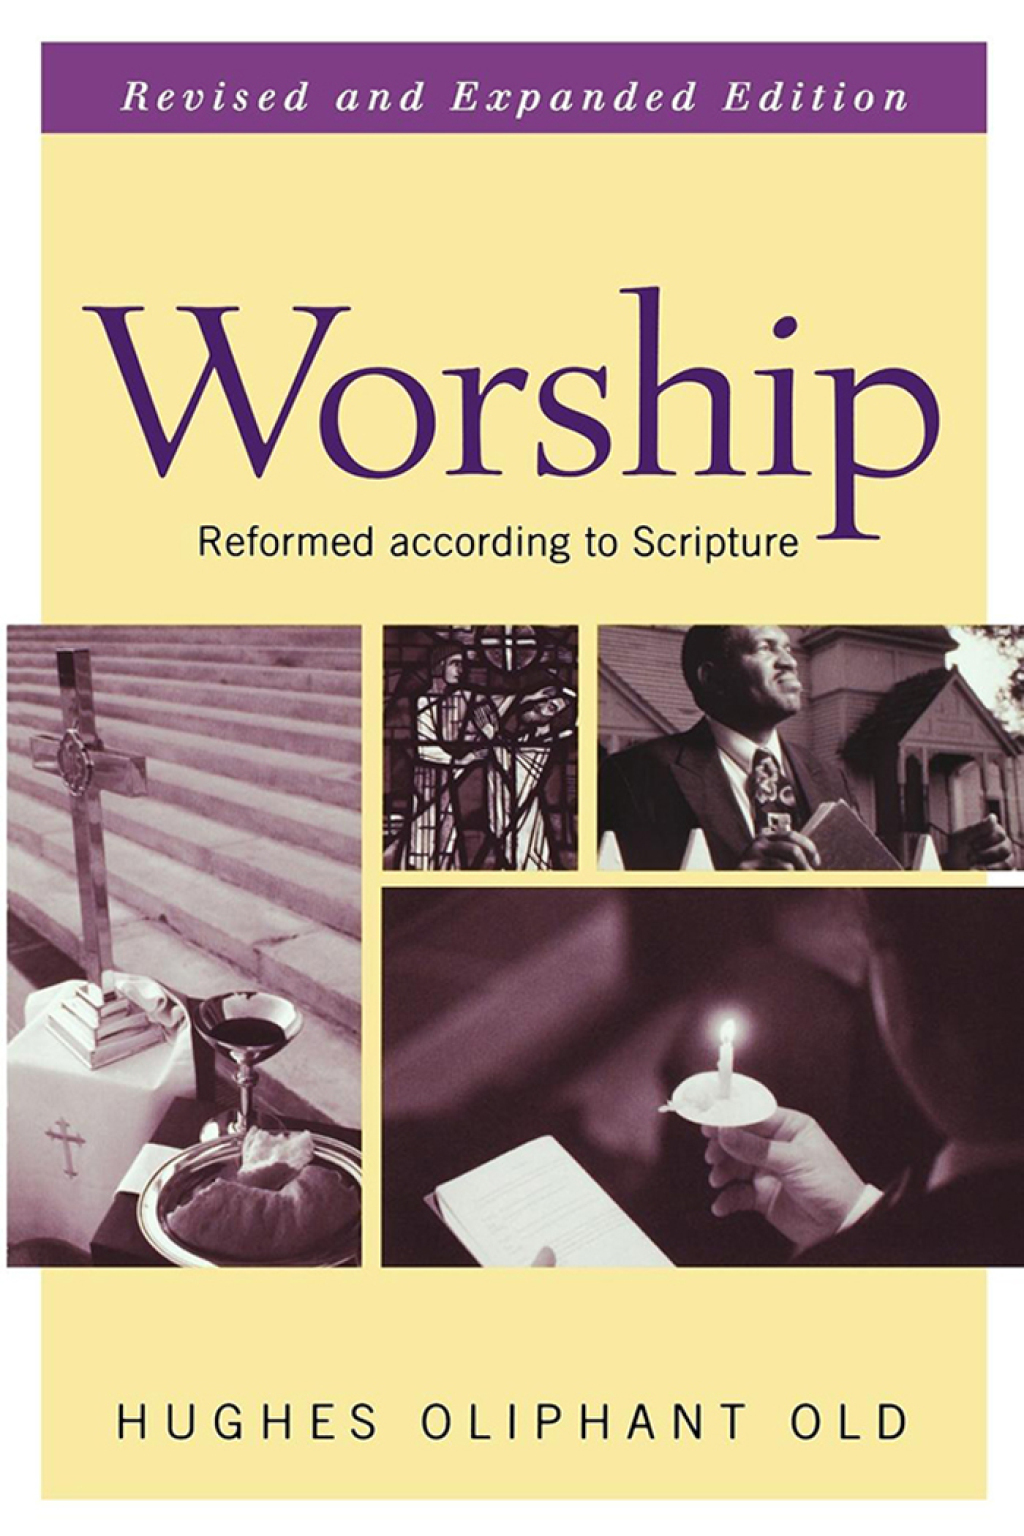 Worship  Revised and Expanded Edition (eBook) - Hughes Oliphant Old,